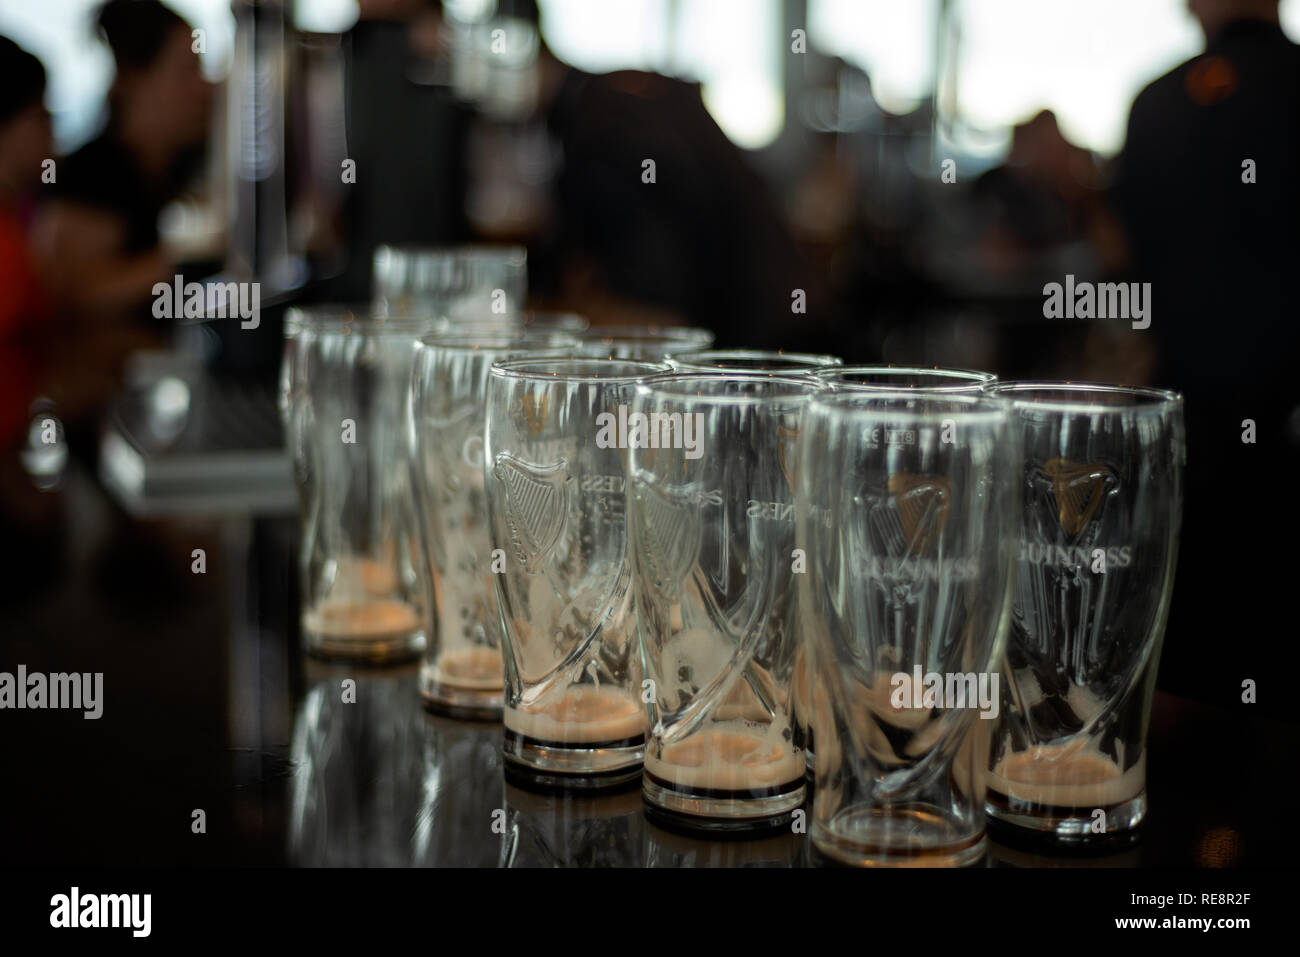 https://c8.alamy.com/comp/RE8R2F/empty-guinness-glasses-in-crowded-bar-and-people-in-background-in-the-gravity-bar-guinness-storehouse-dublin-ireland-RE8R2F.jpg